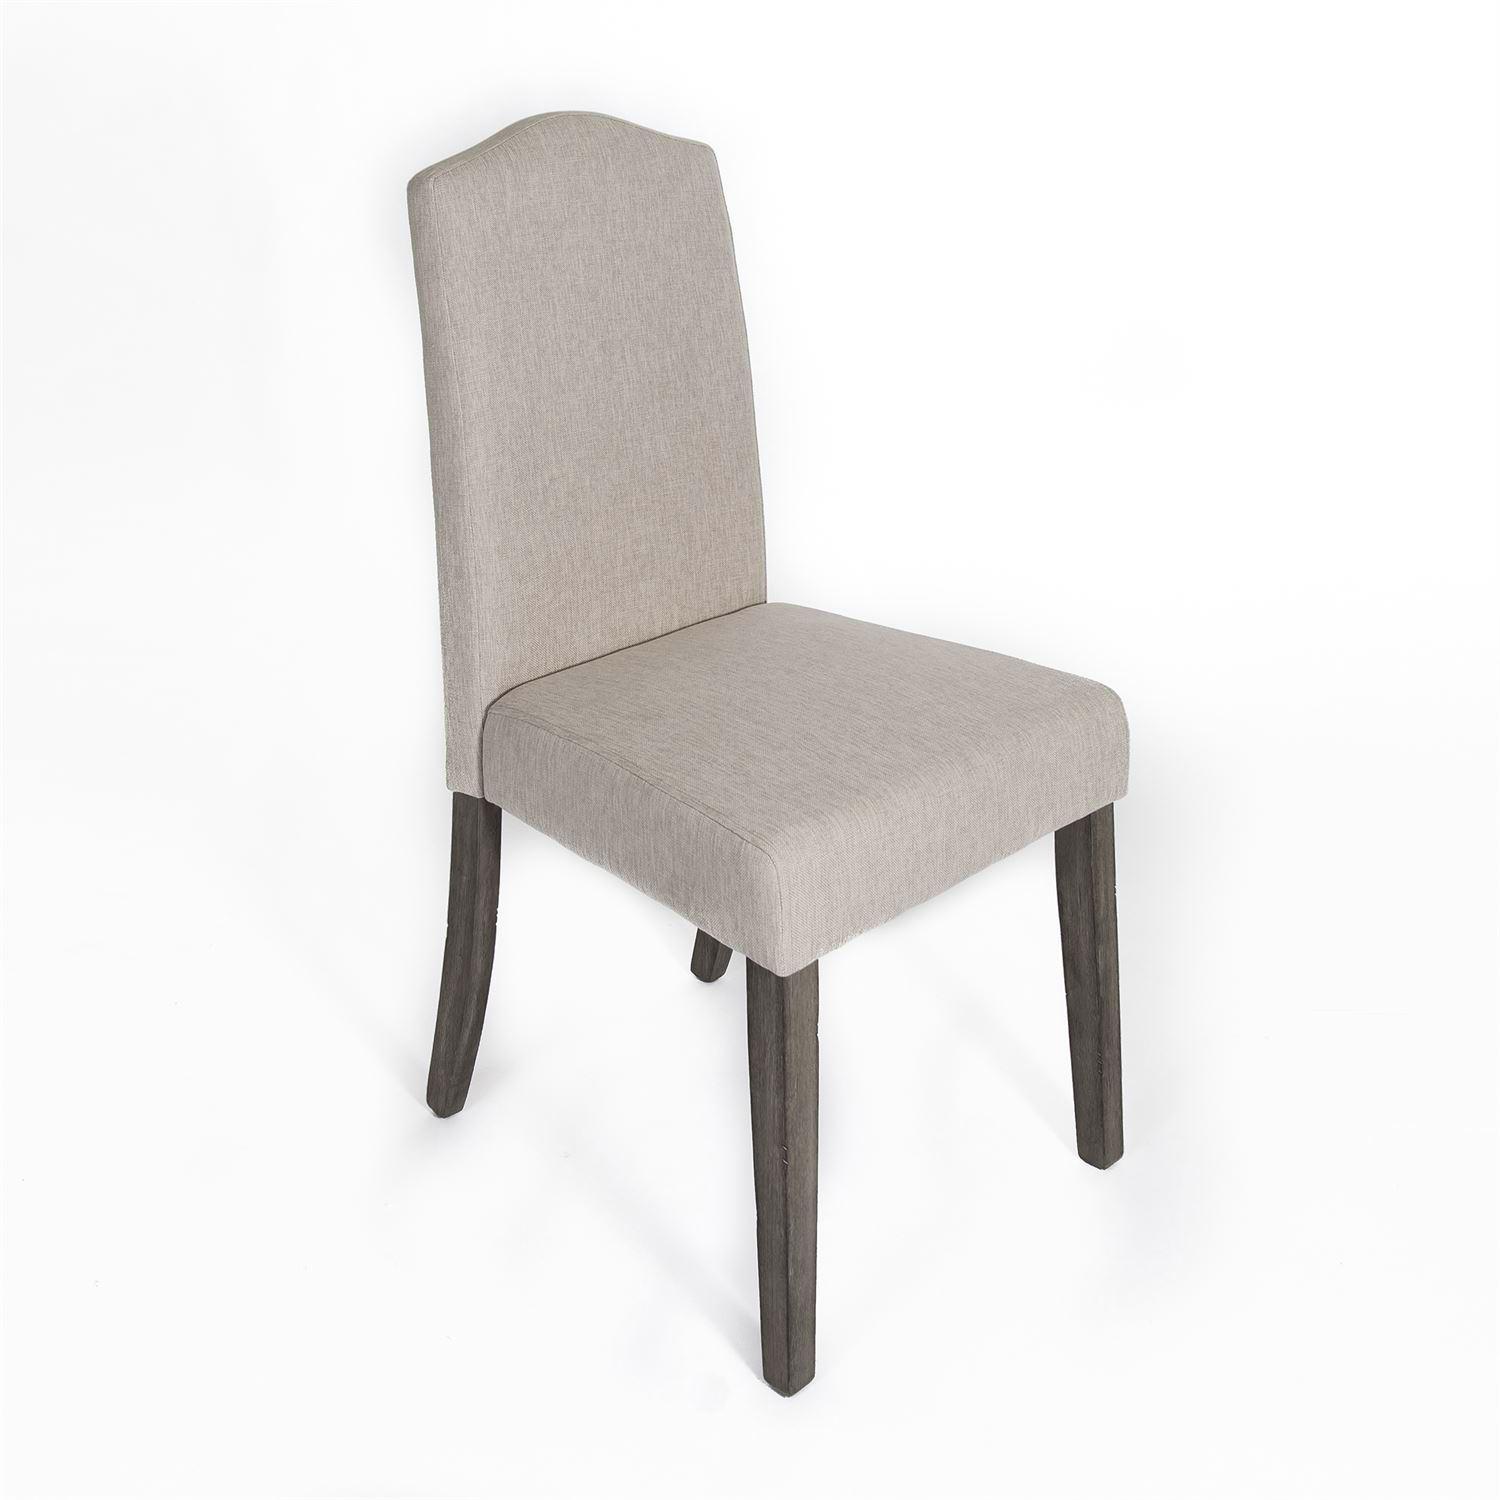 Contemporary Dining Side Chair Carolina Lakes  (140-CD) Dining Side Chair 140-C6501S-T-Set-2 in Tan, Gray Fabric